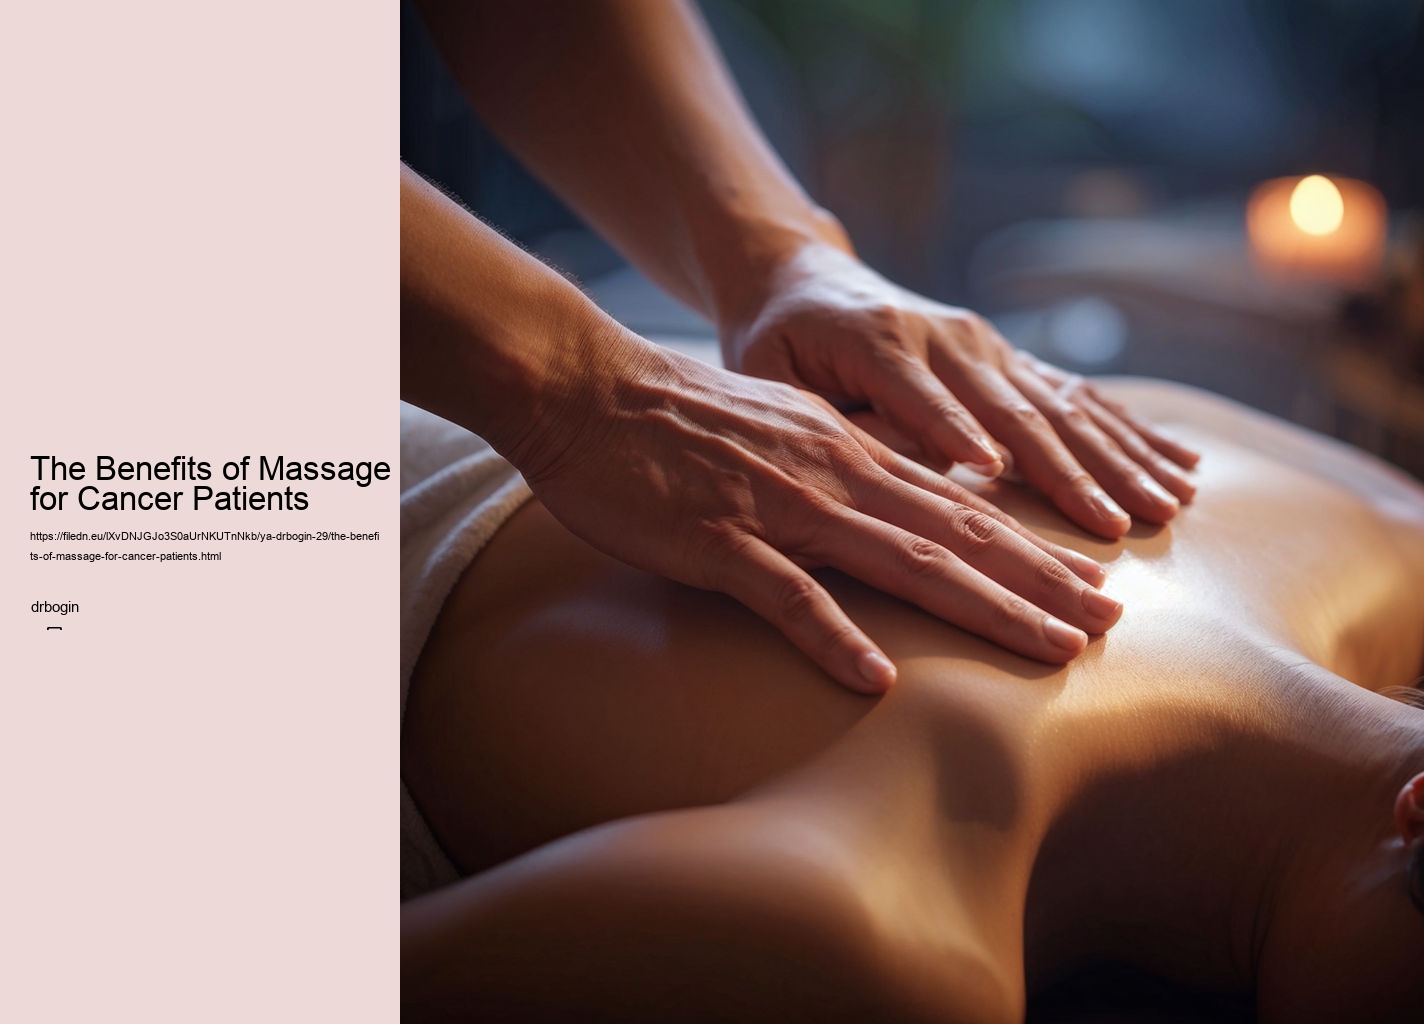 The Benefits of Massage for Cancer Patients